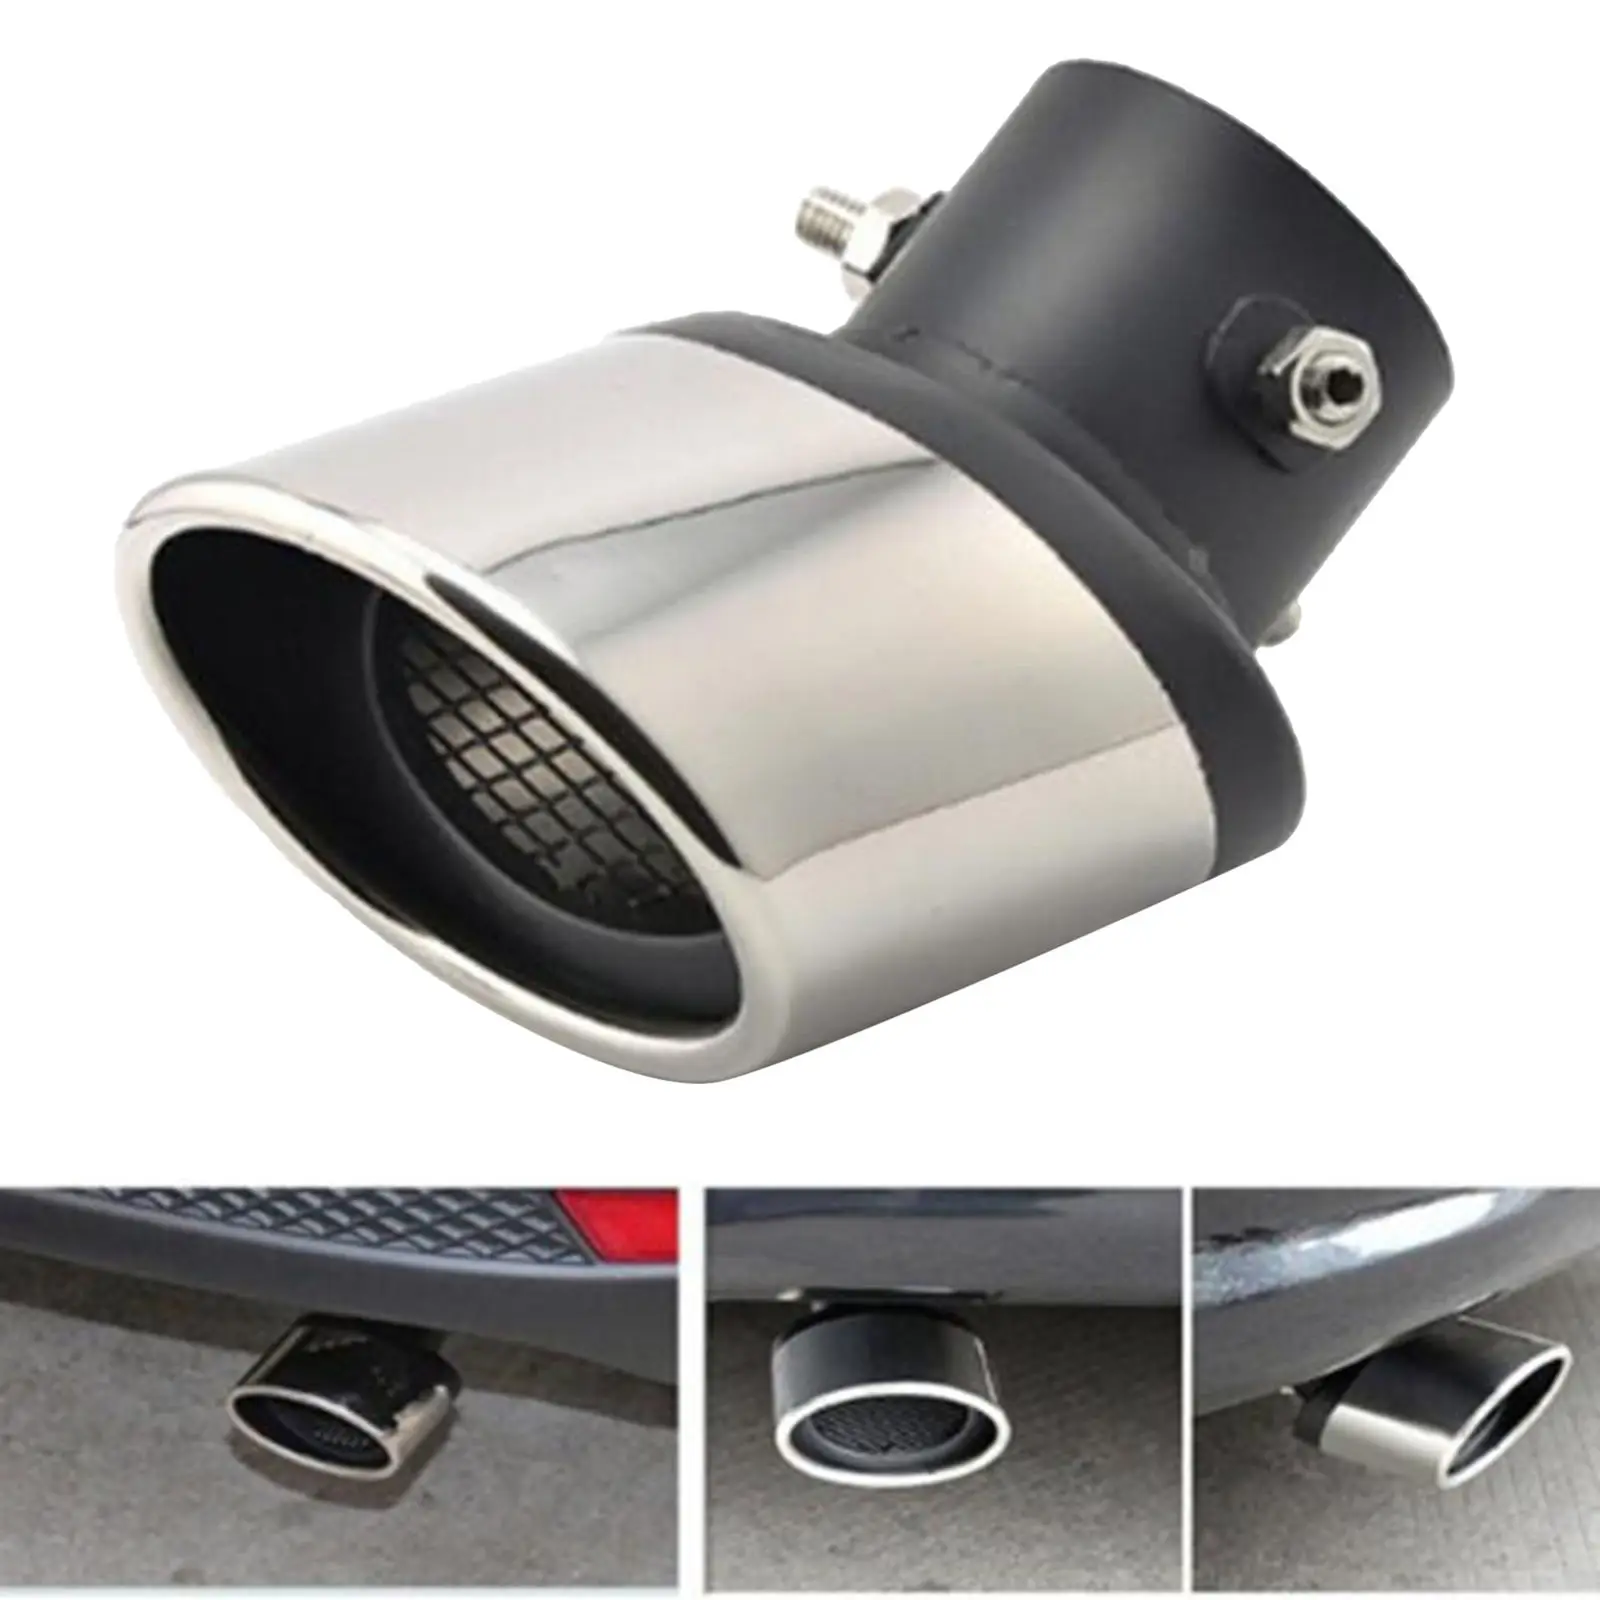 Car Exhaust Tail Pipe End Trim Tip for Mazda 5 6, BYD S6, Cruze Car Modification Stainless Steel Exhaust Rear Tail Pipe